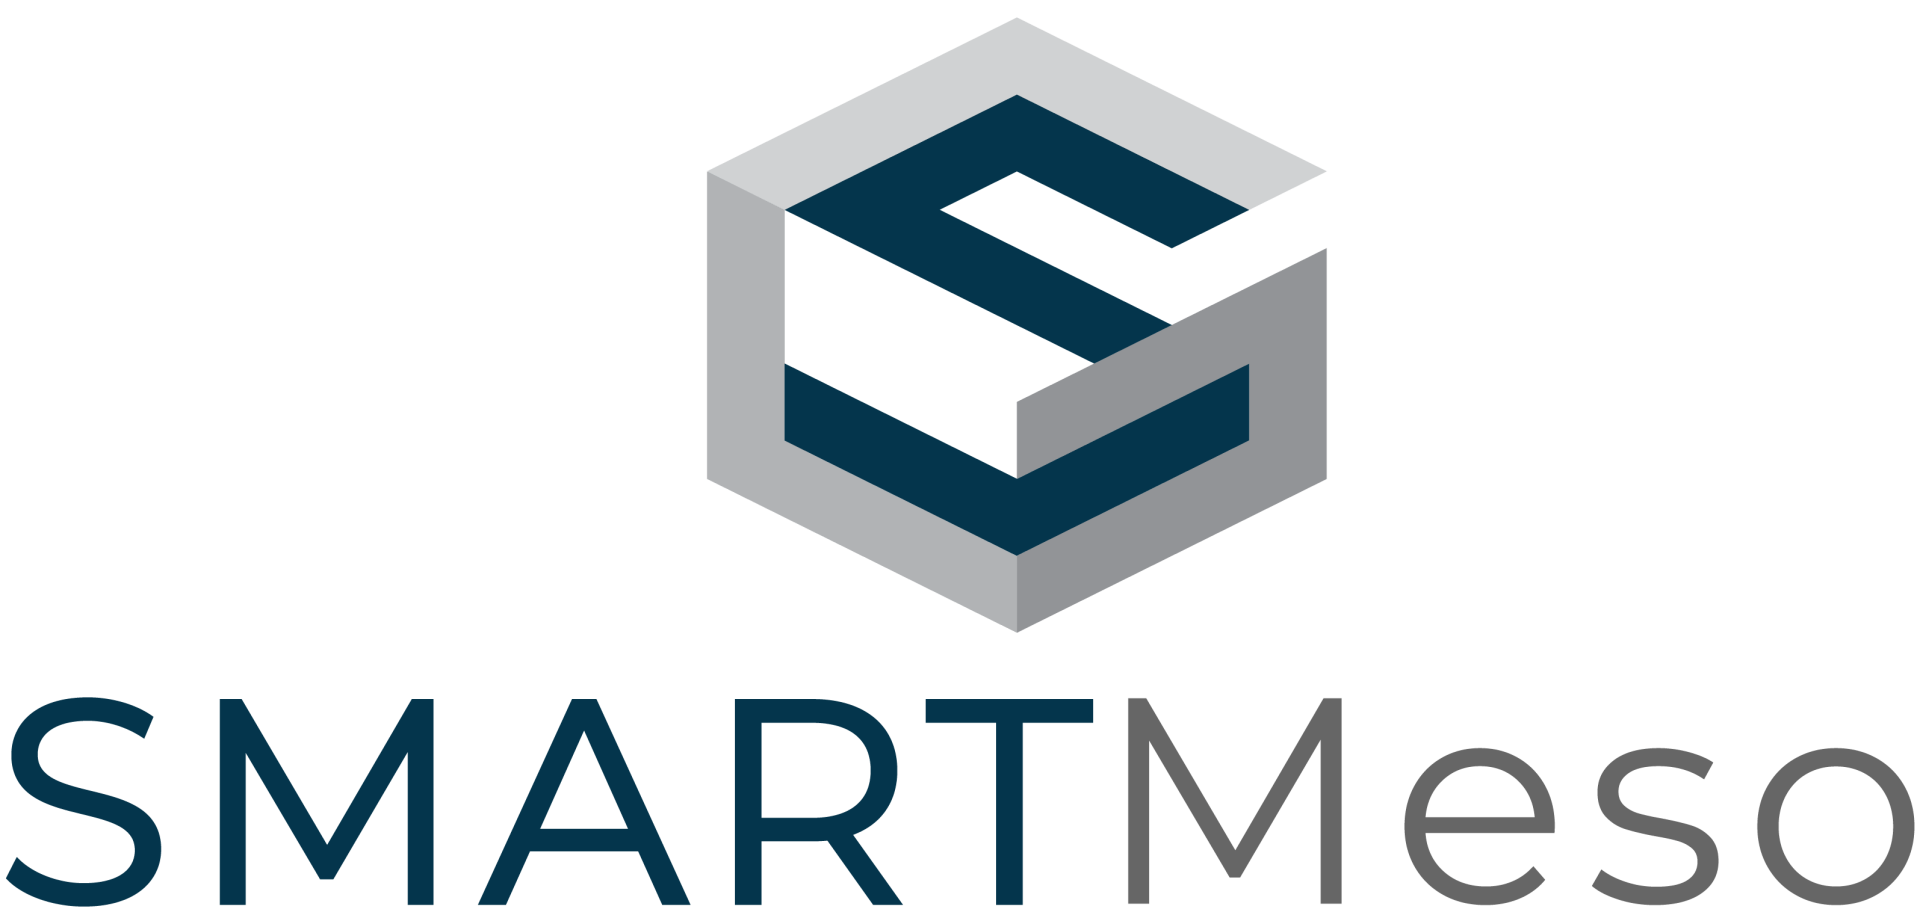 The logo for smartmeso is a cube with a letter s on it.